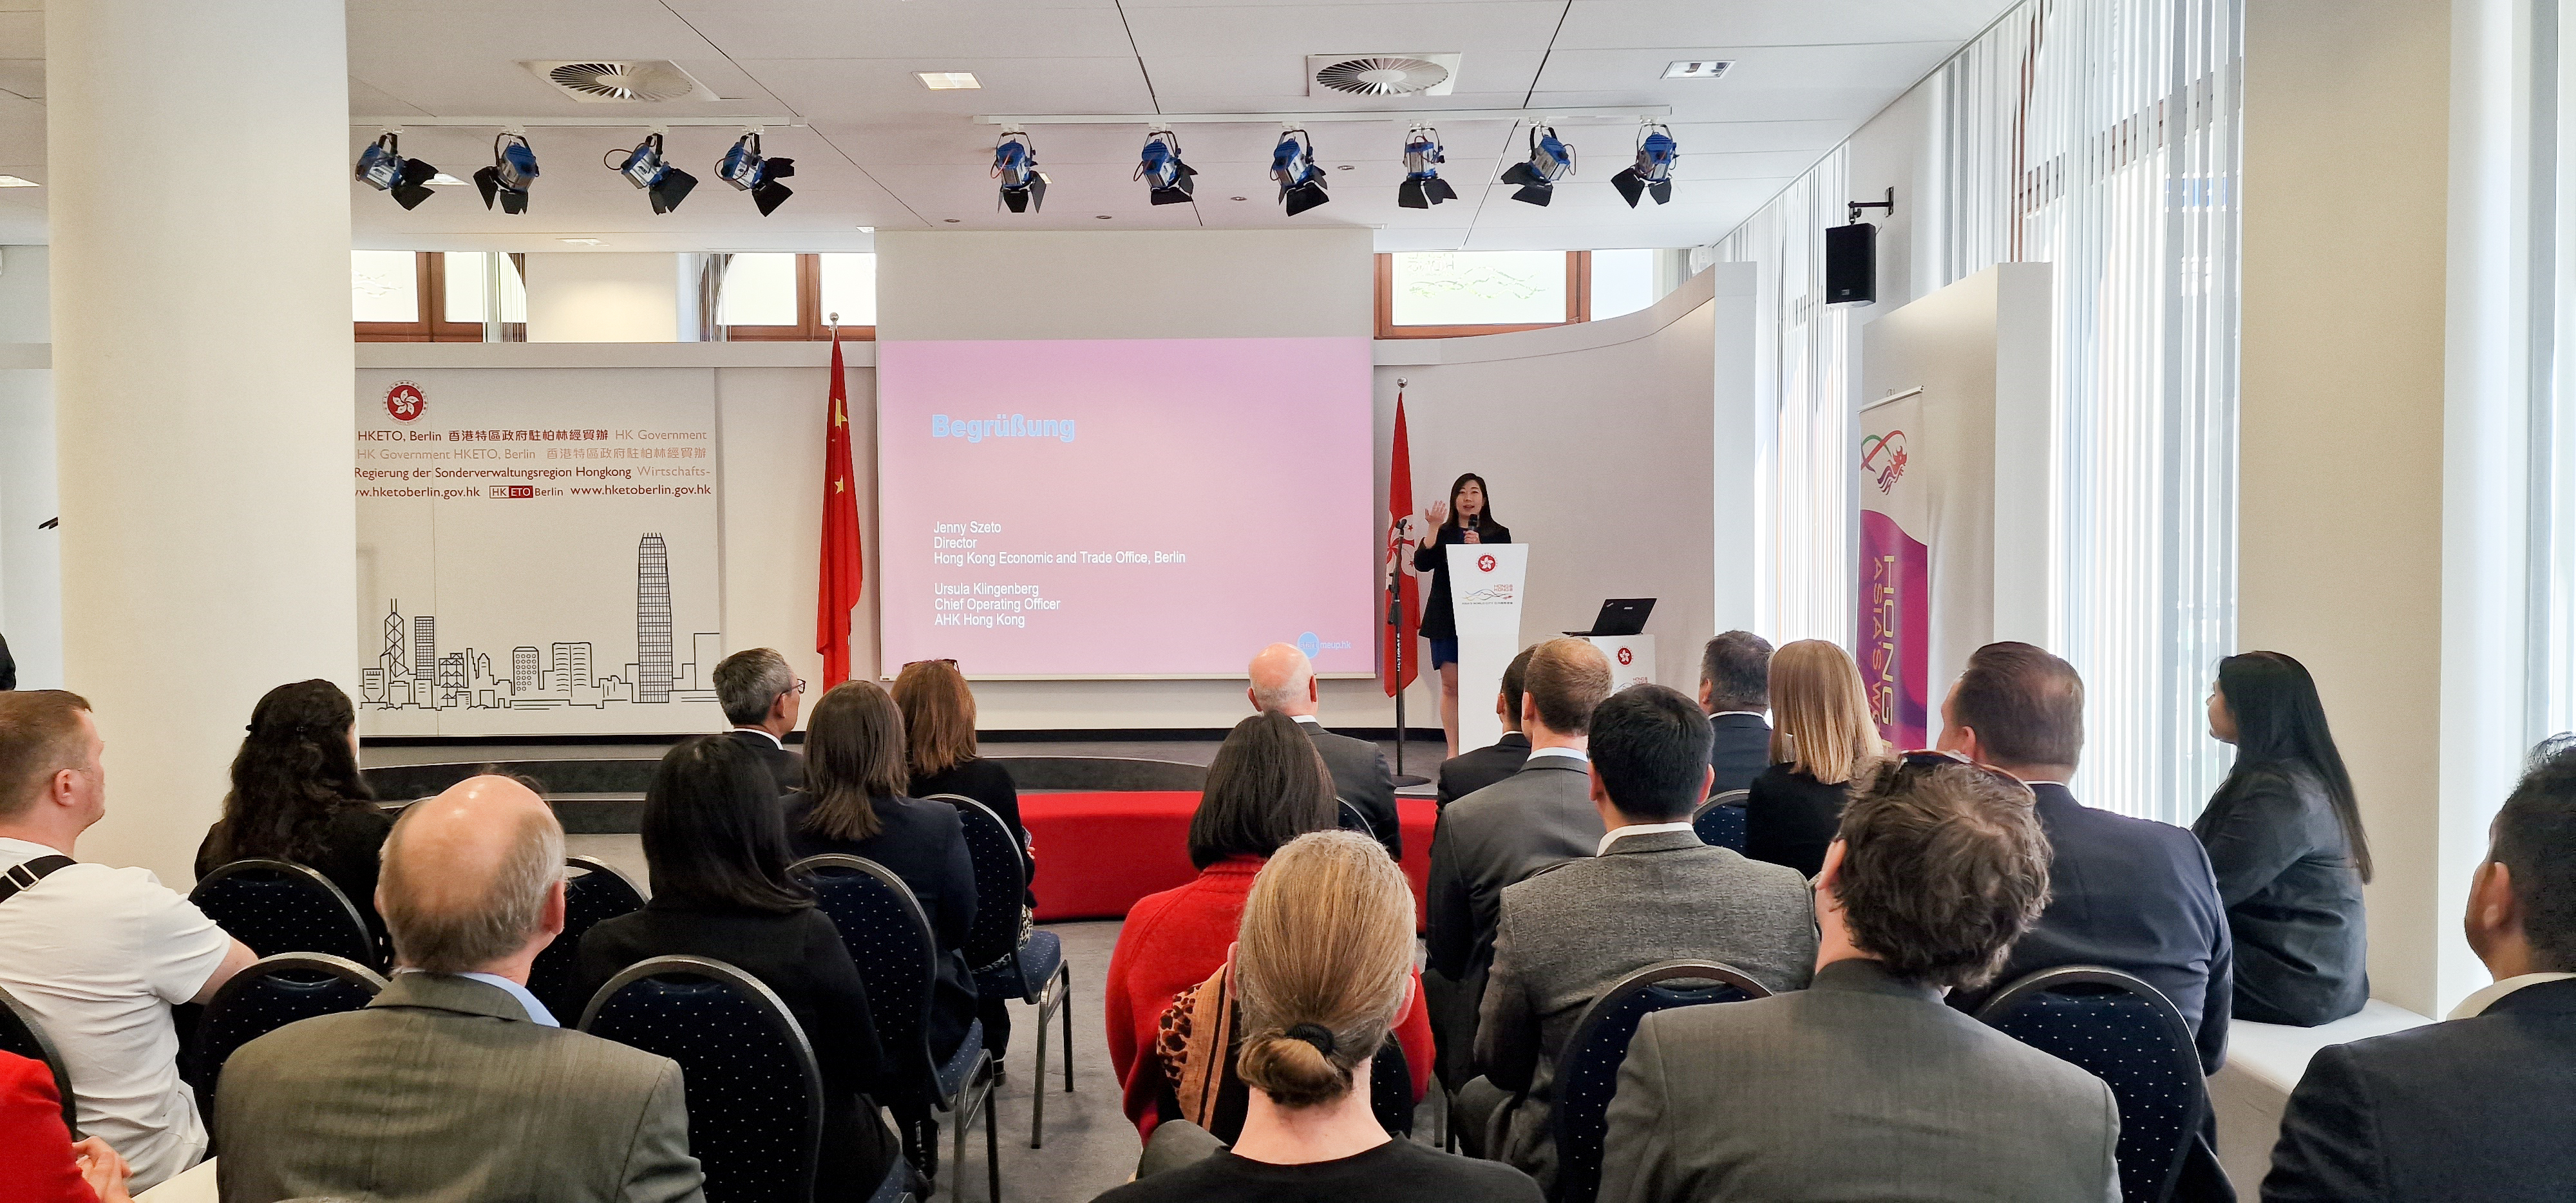 Ms Jenny Szeto, Director of HKETO Berlin, speaking at the start-up event in Berlin on 12 May 2023 (Berlin time).